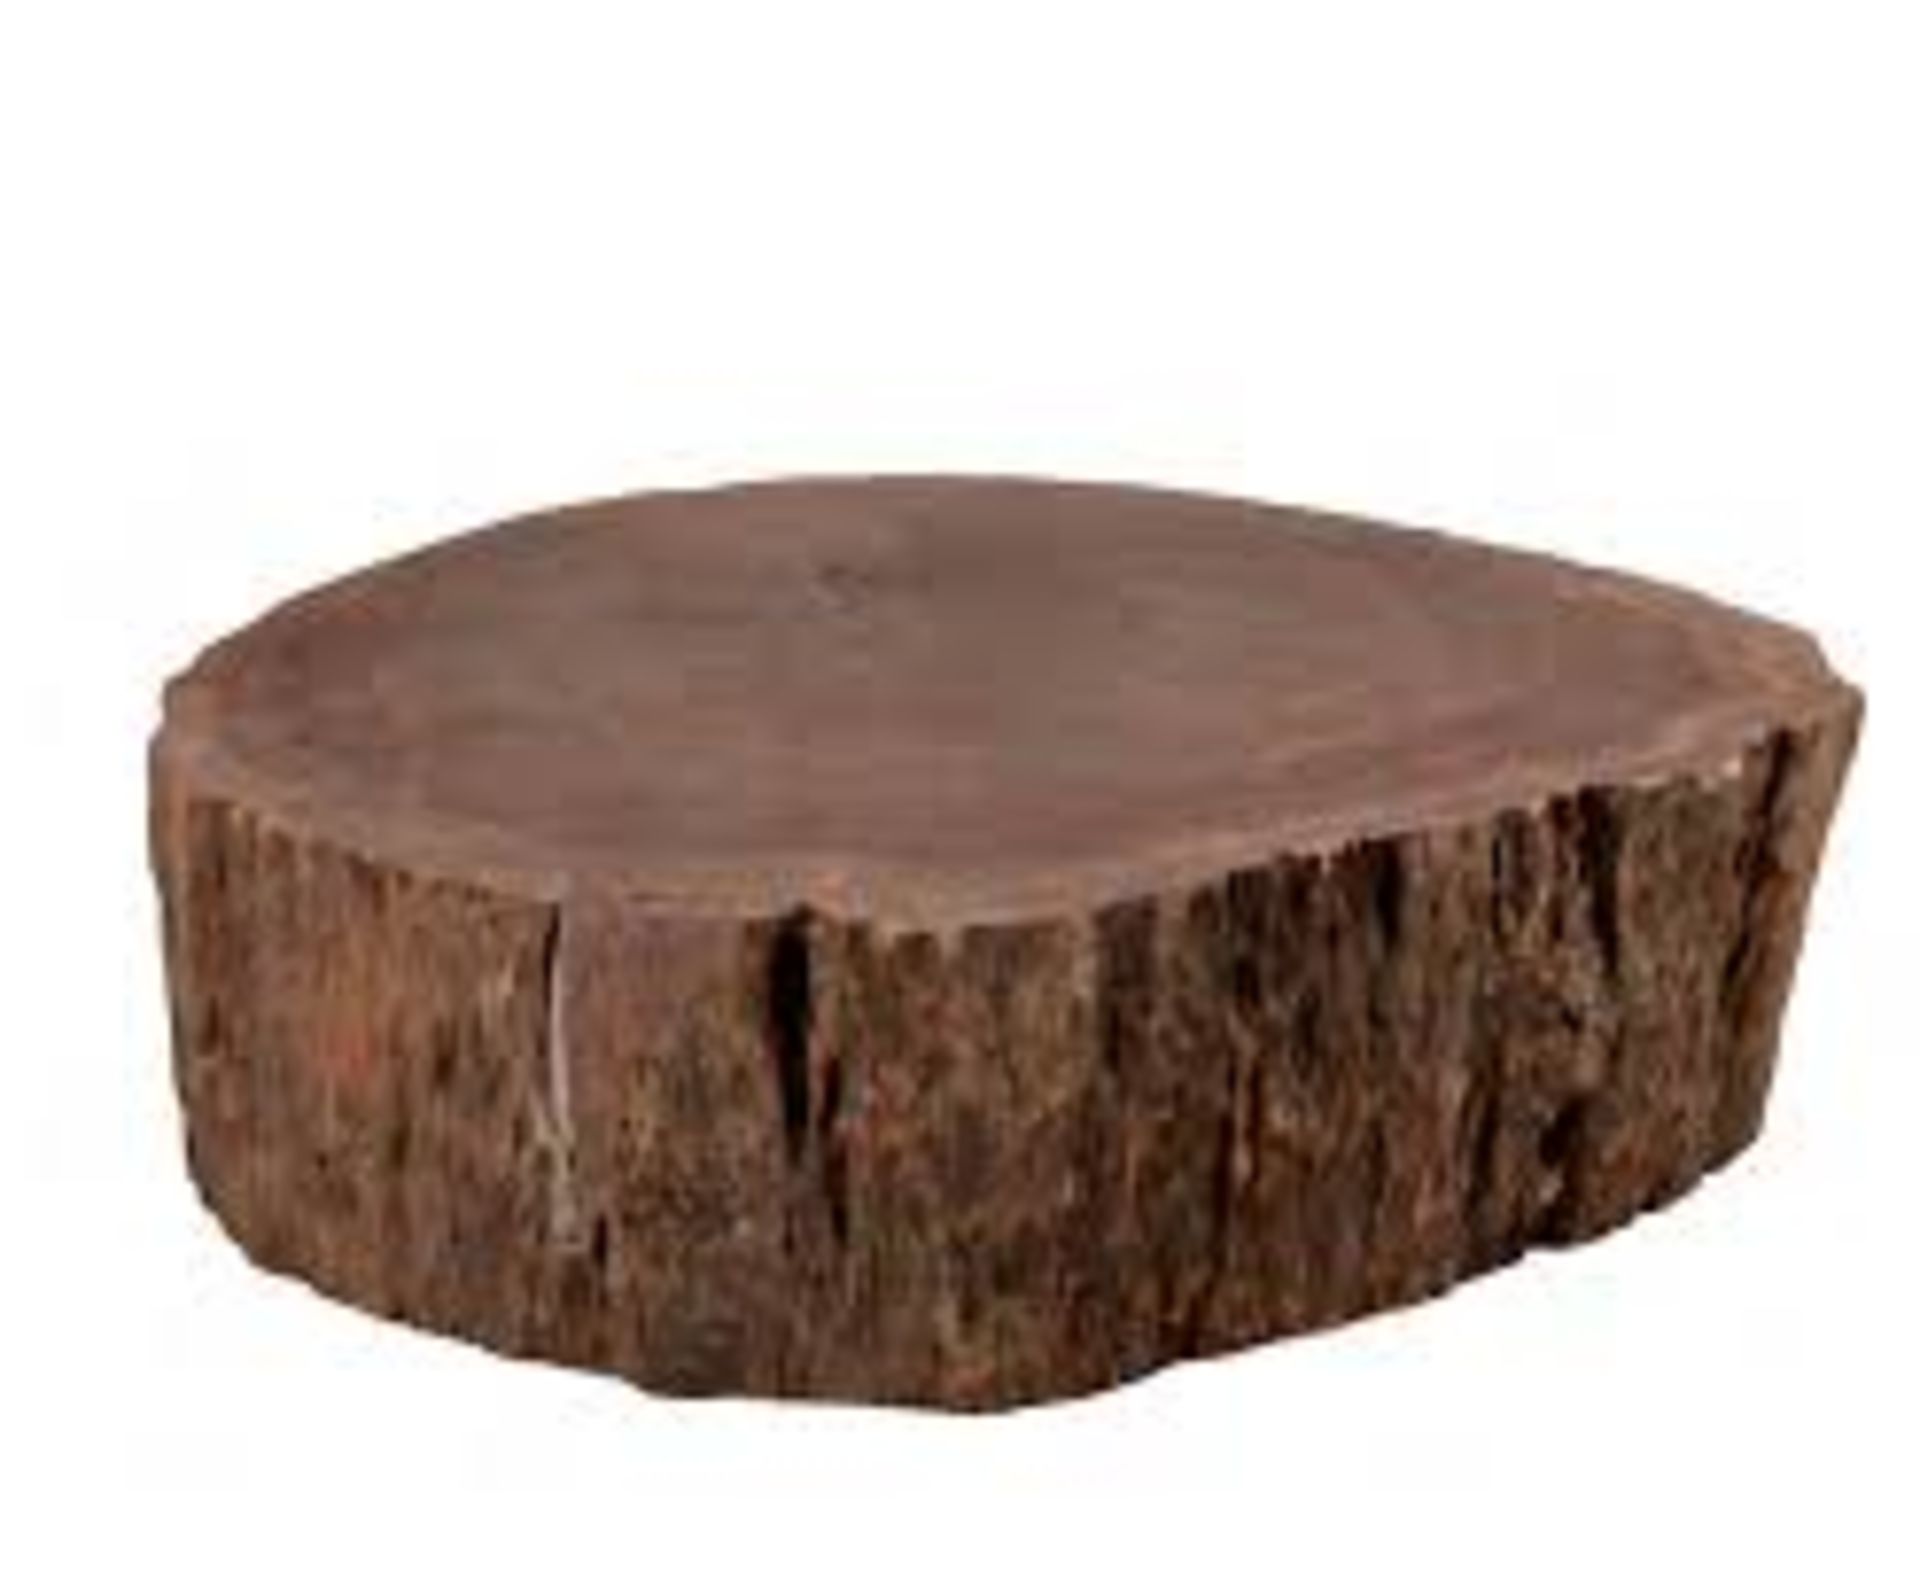 Colossus Log Coffee Table Huge Petrified Log Straight From The Forest Into Your Home Comes Colossus,